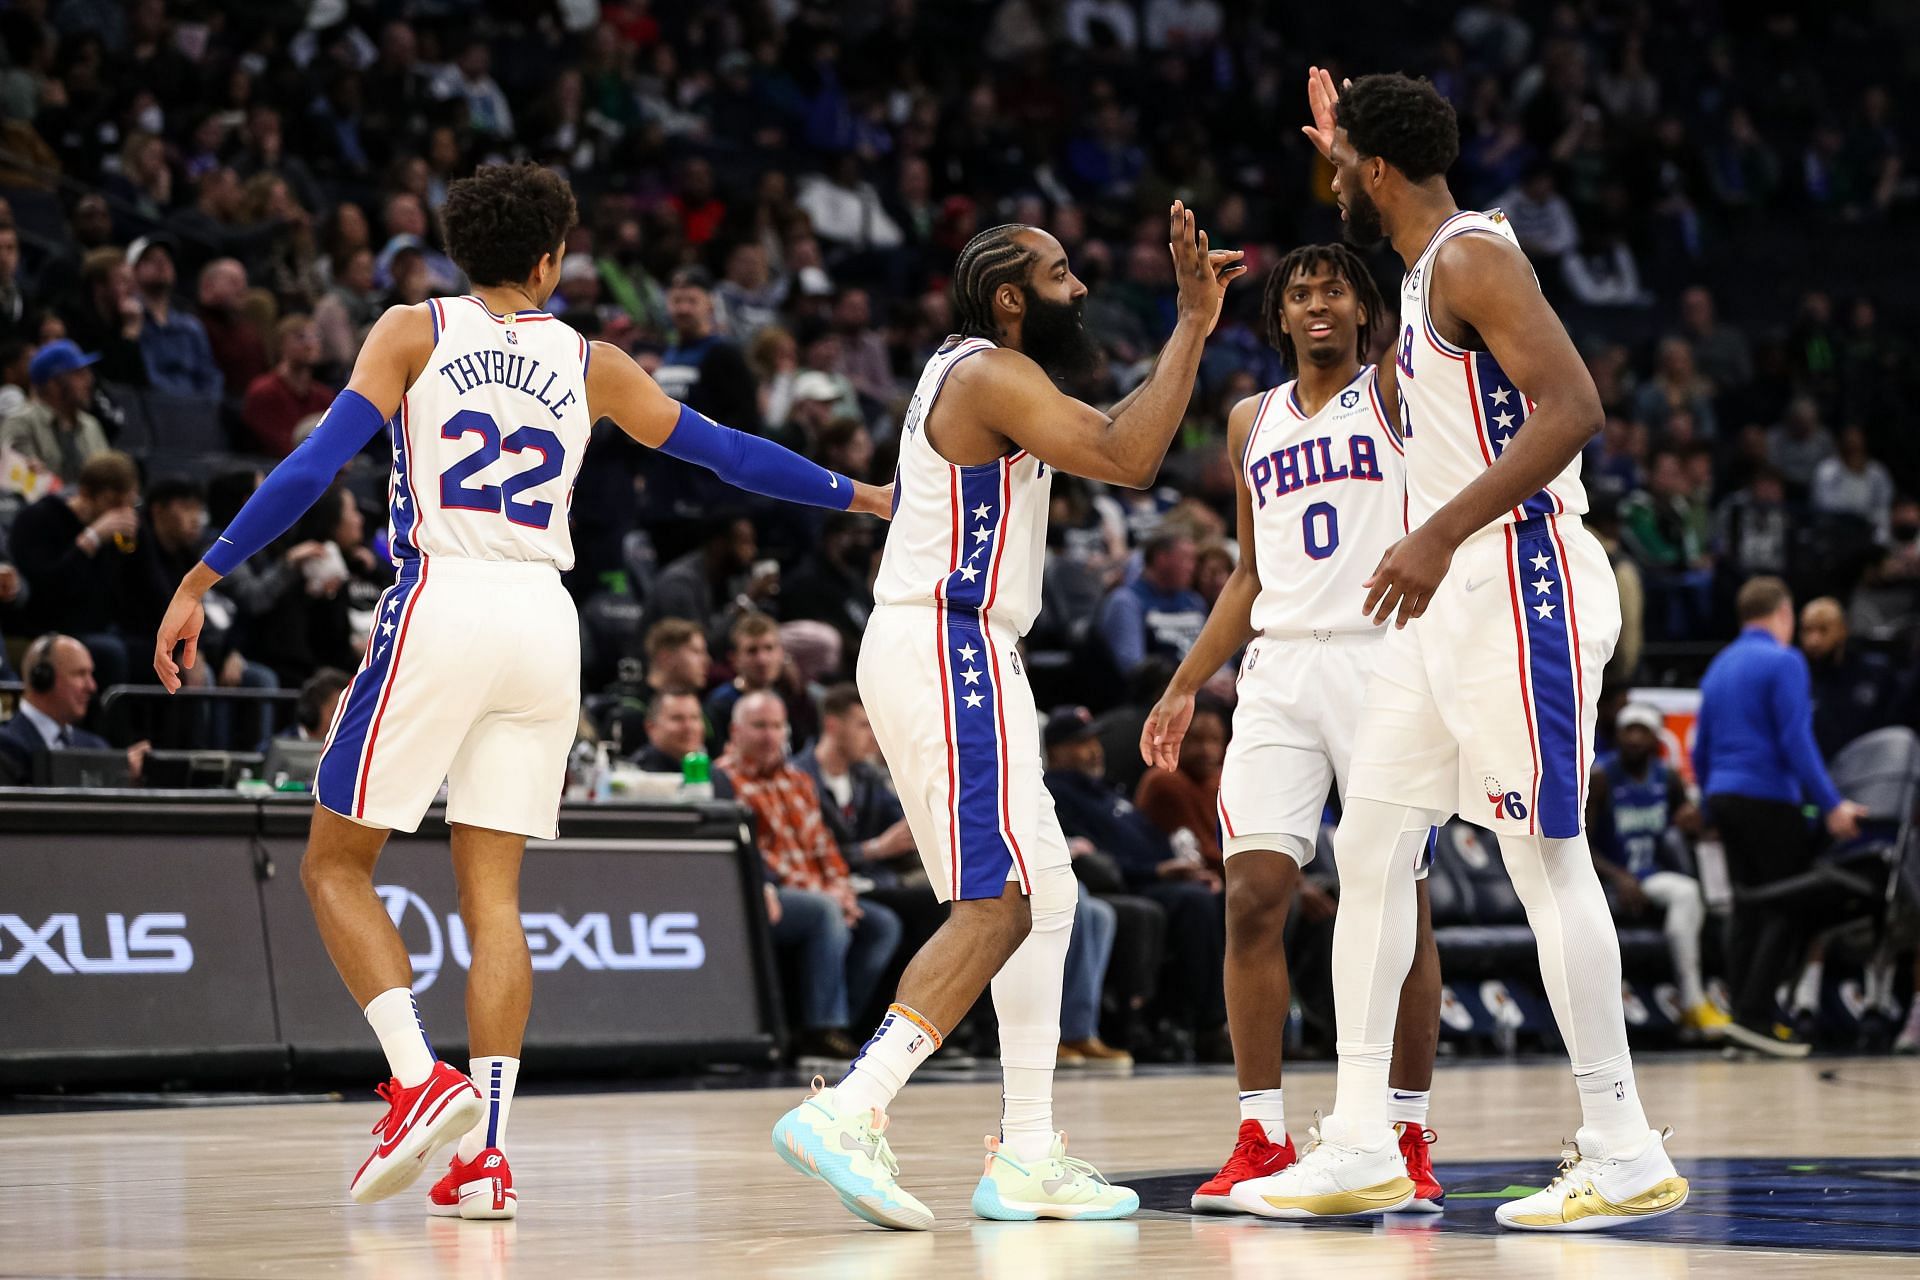 Matisse Thybulle, James Harden, Tyrese Maxey and Joel Embiid of the Philadelphia 76ers